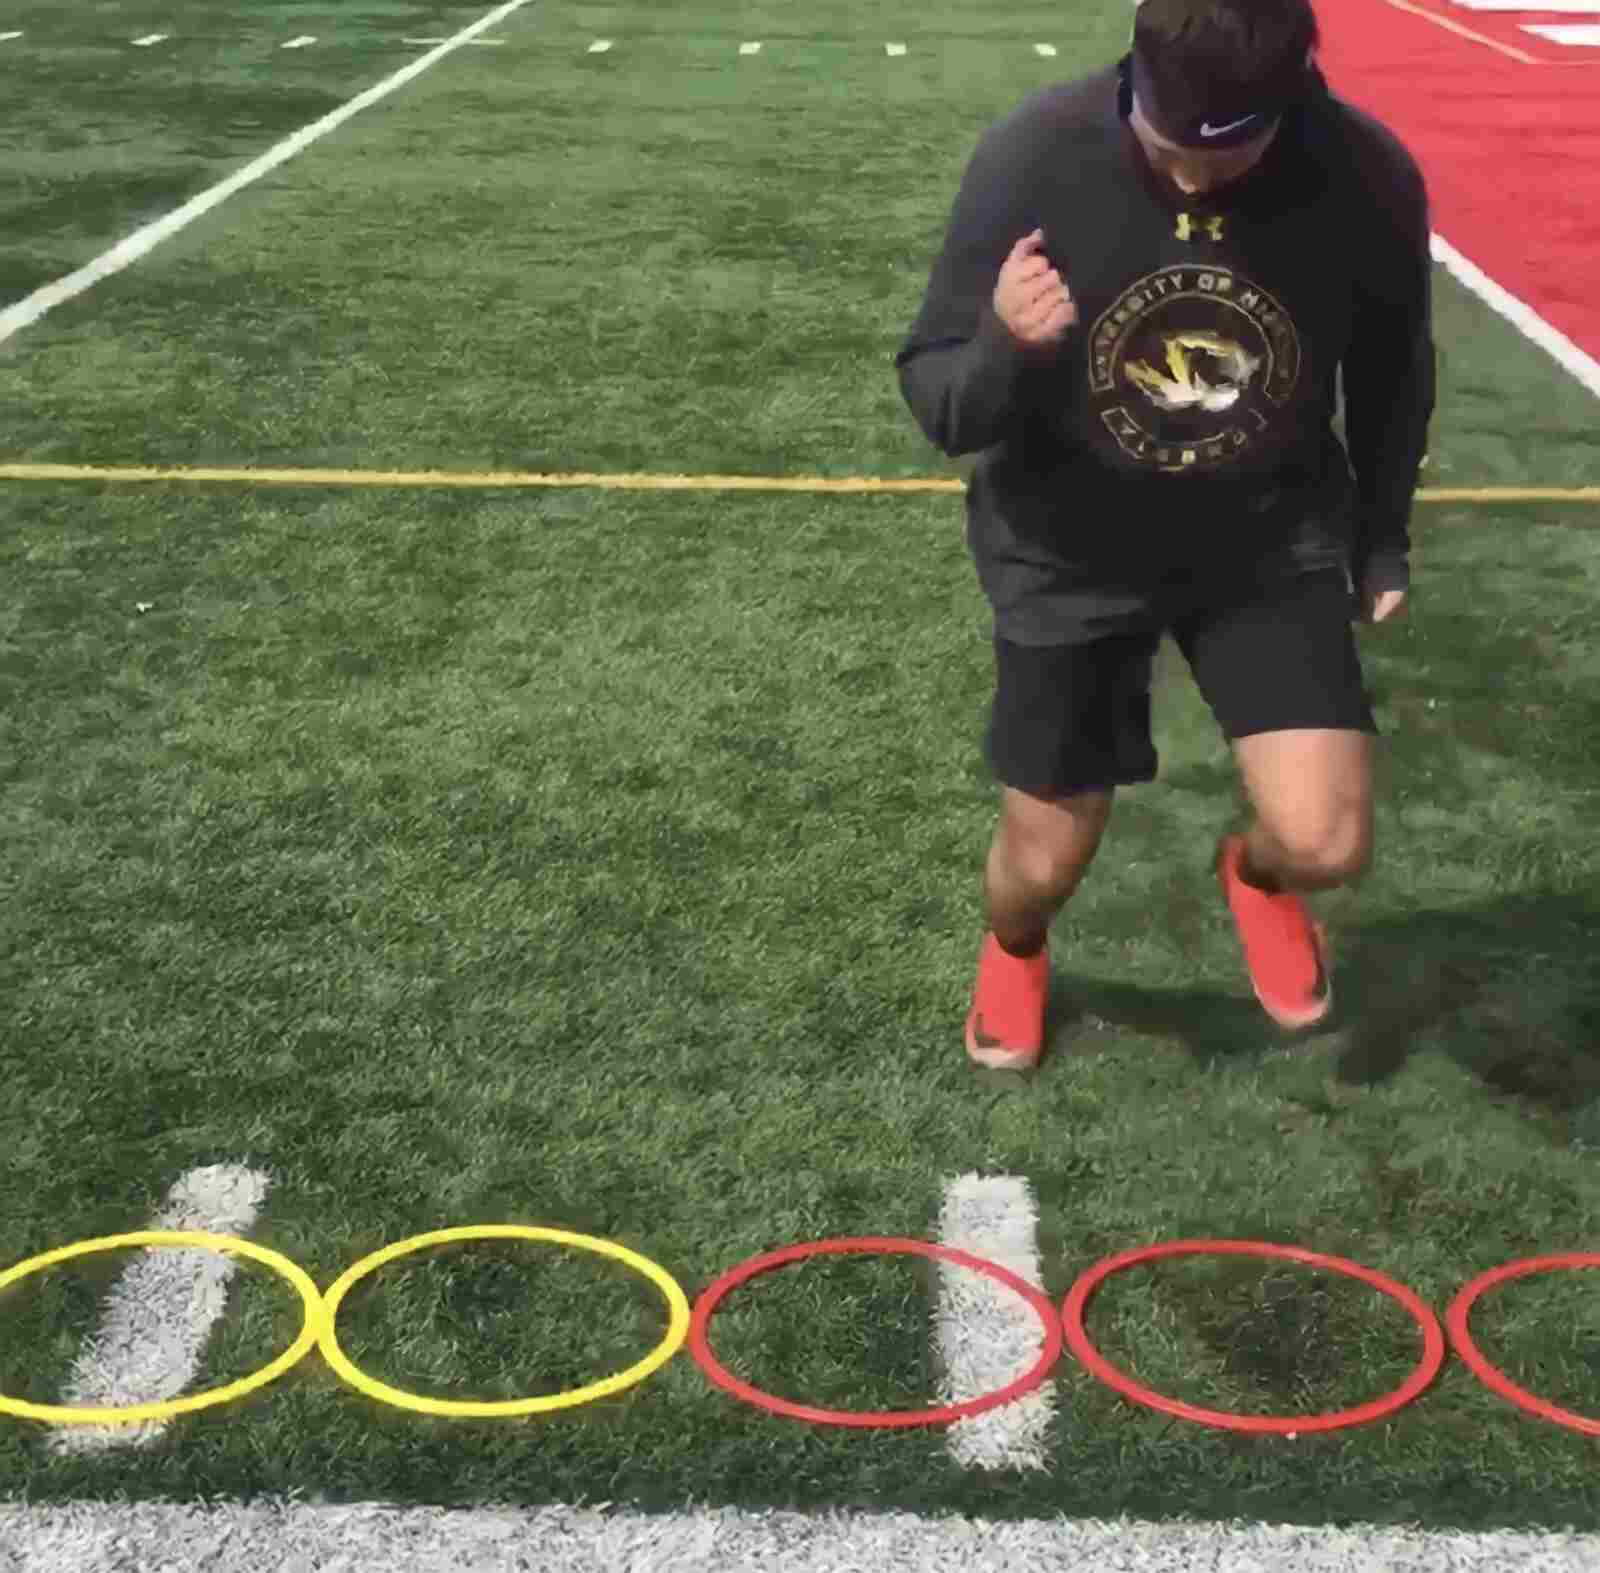 hex rings agility workout for american football players